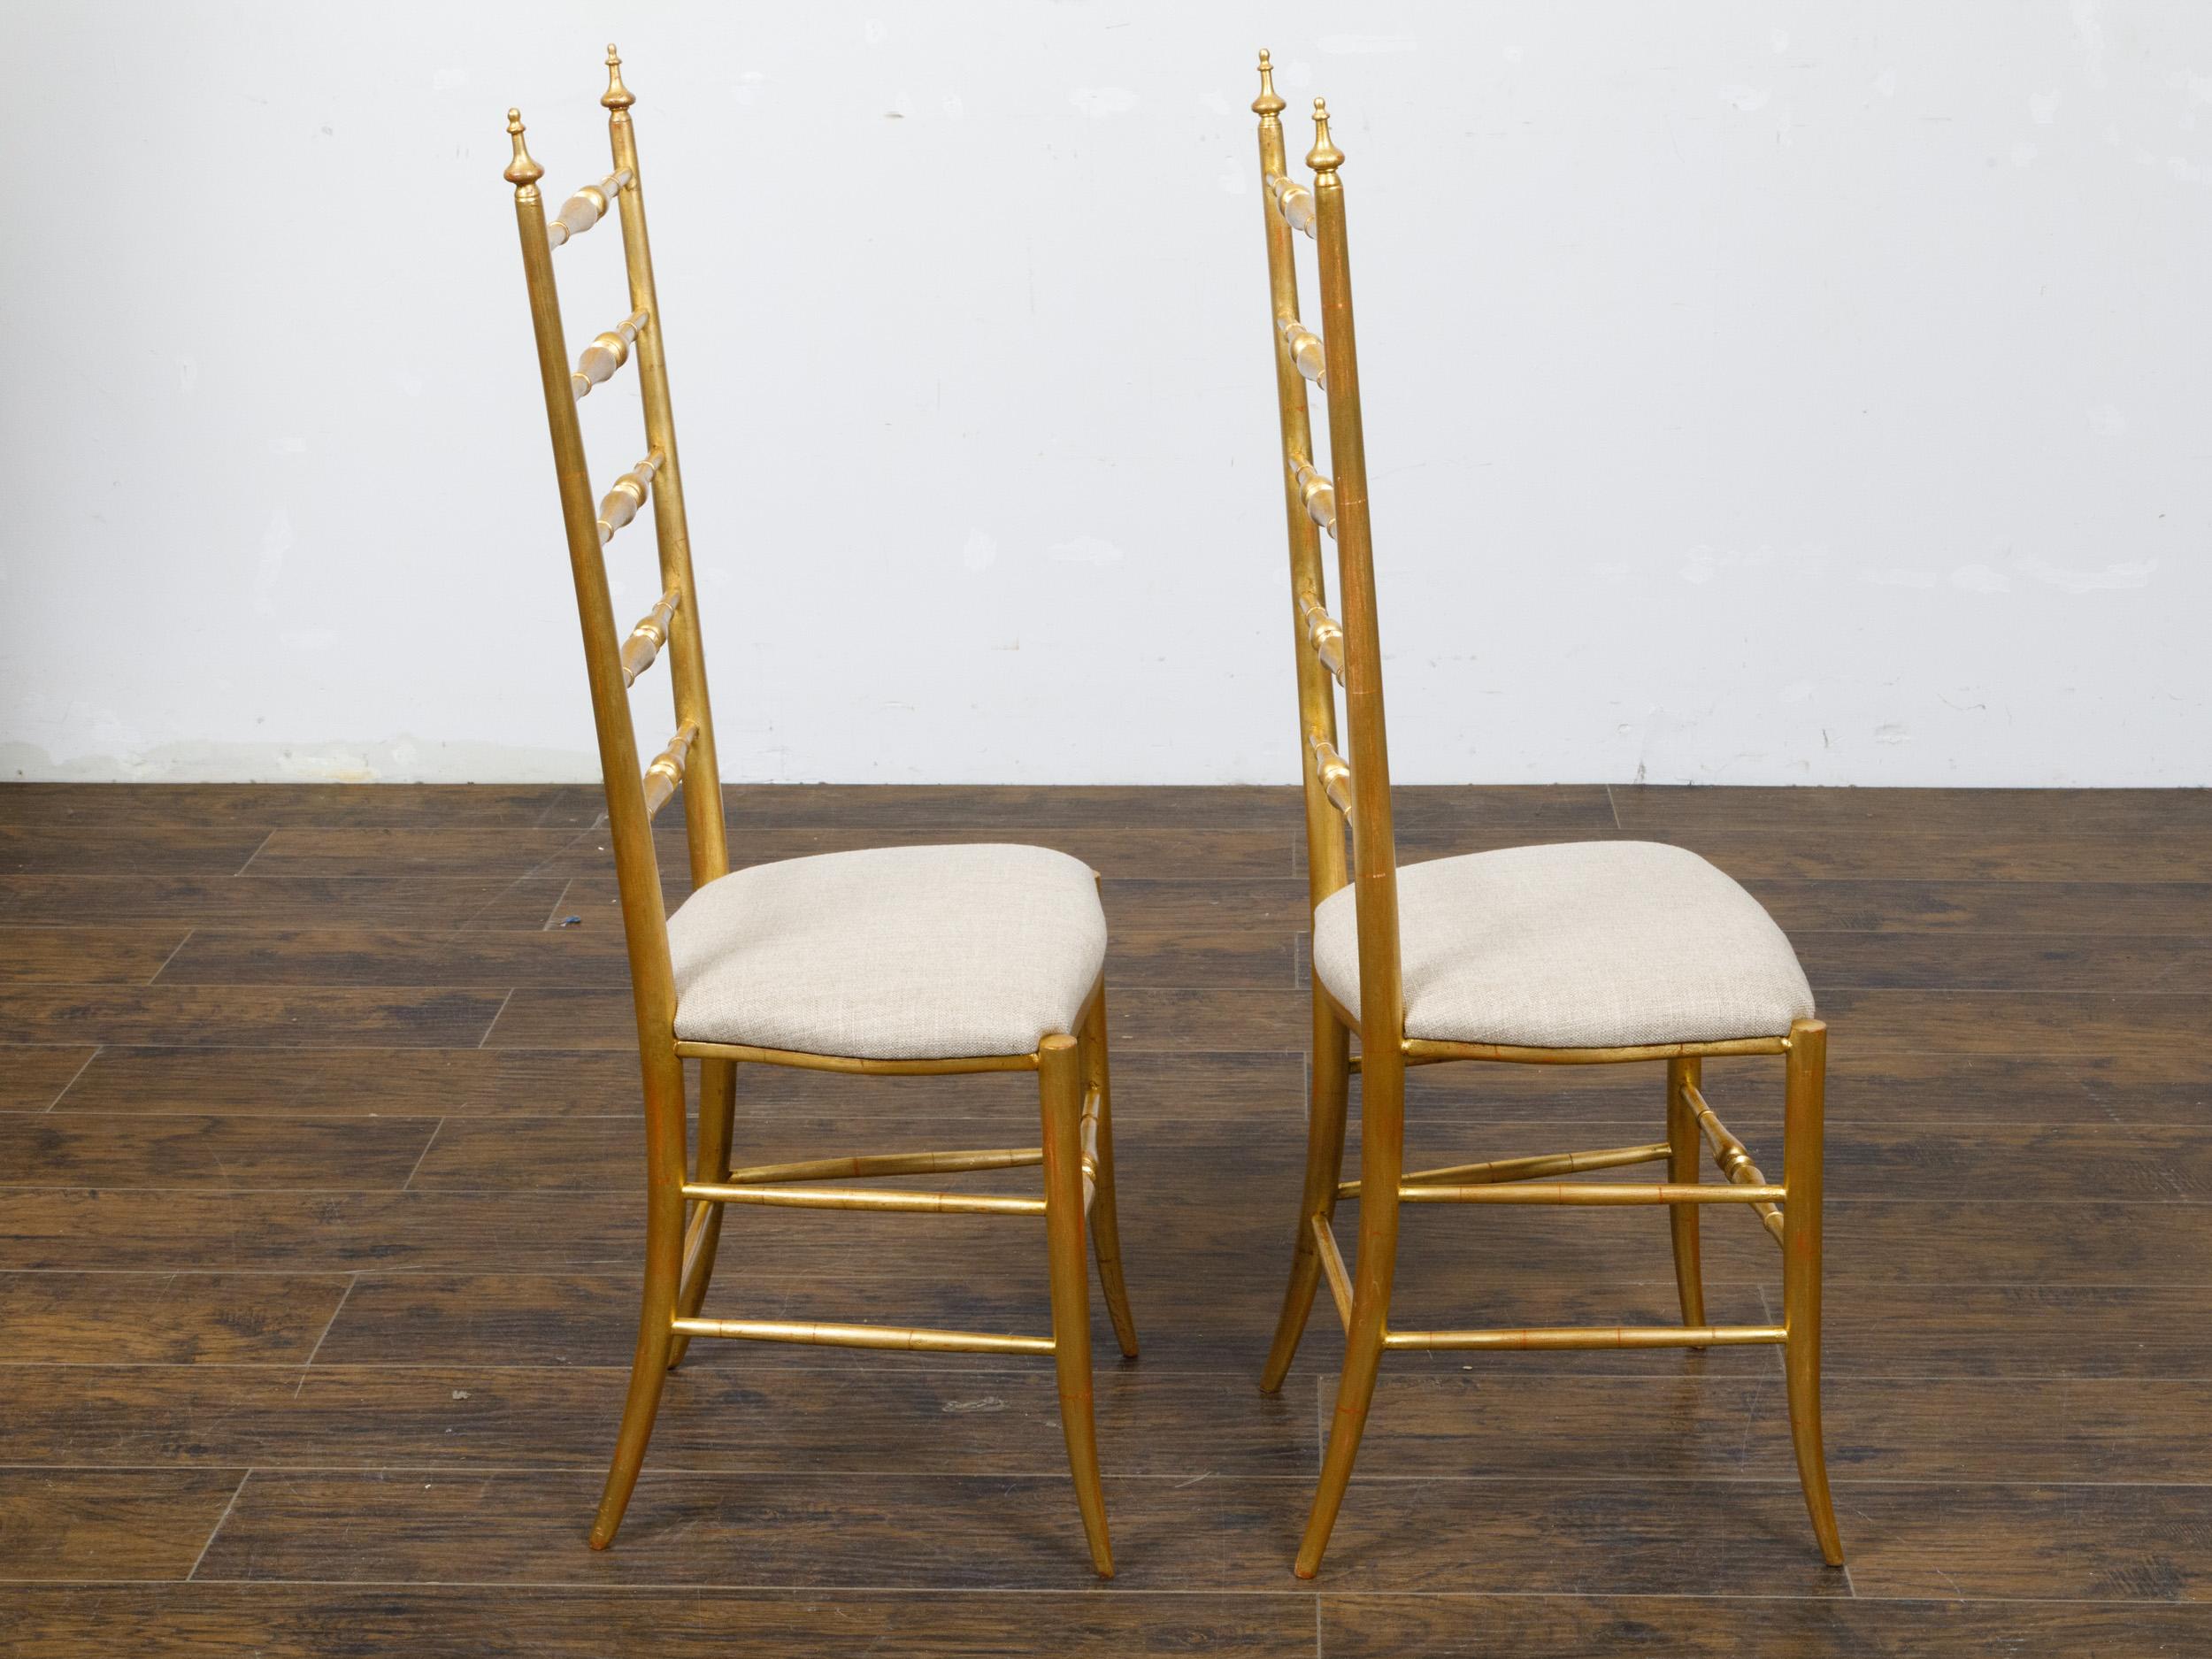 20th Century Pair of Midcentury Italian Gilt Wood High Back Side Chairs with Upholstery For Sale